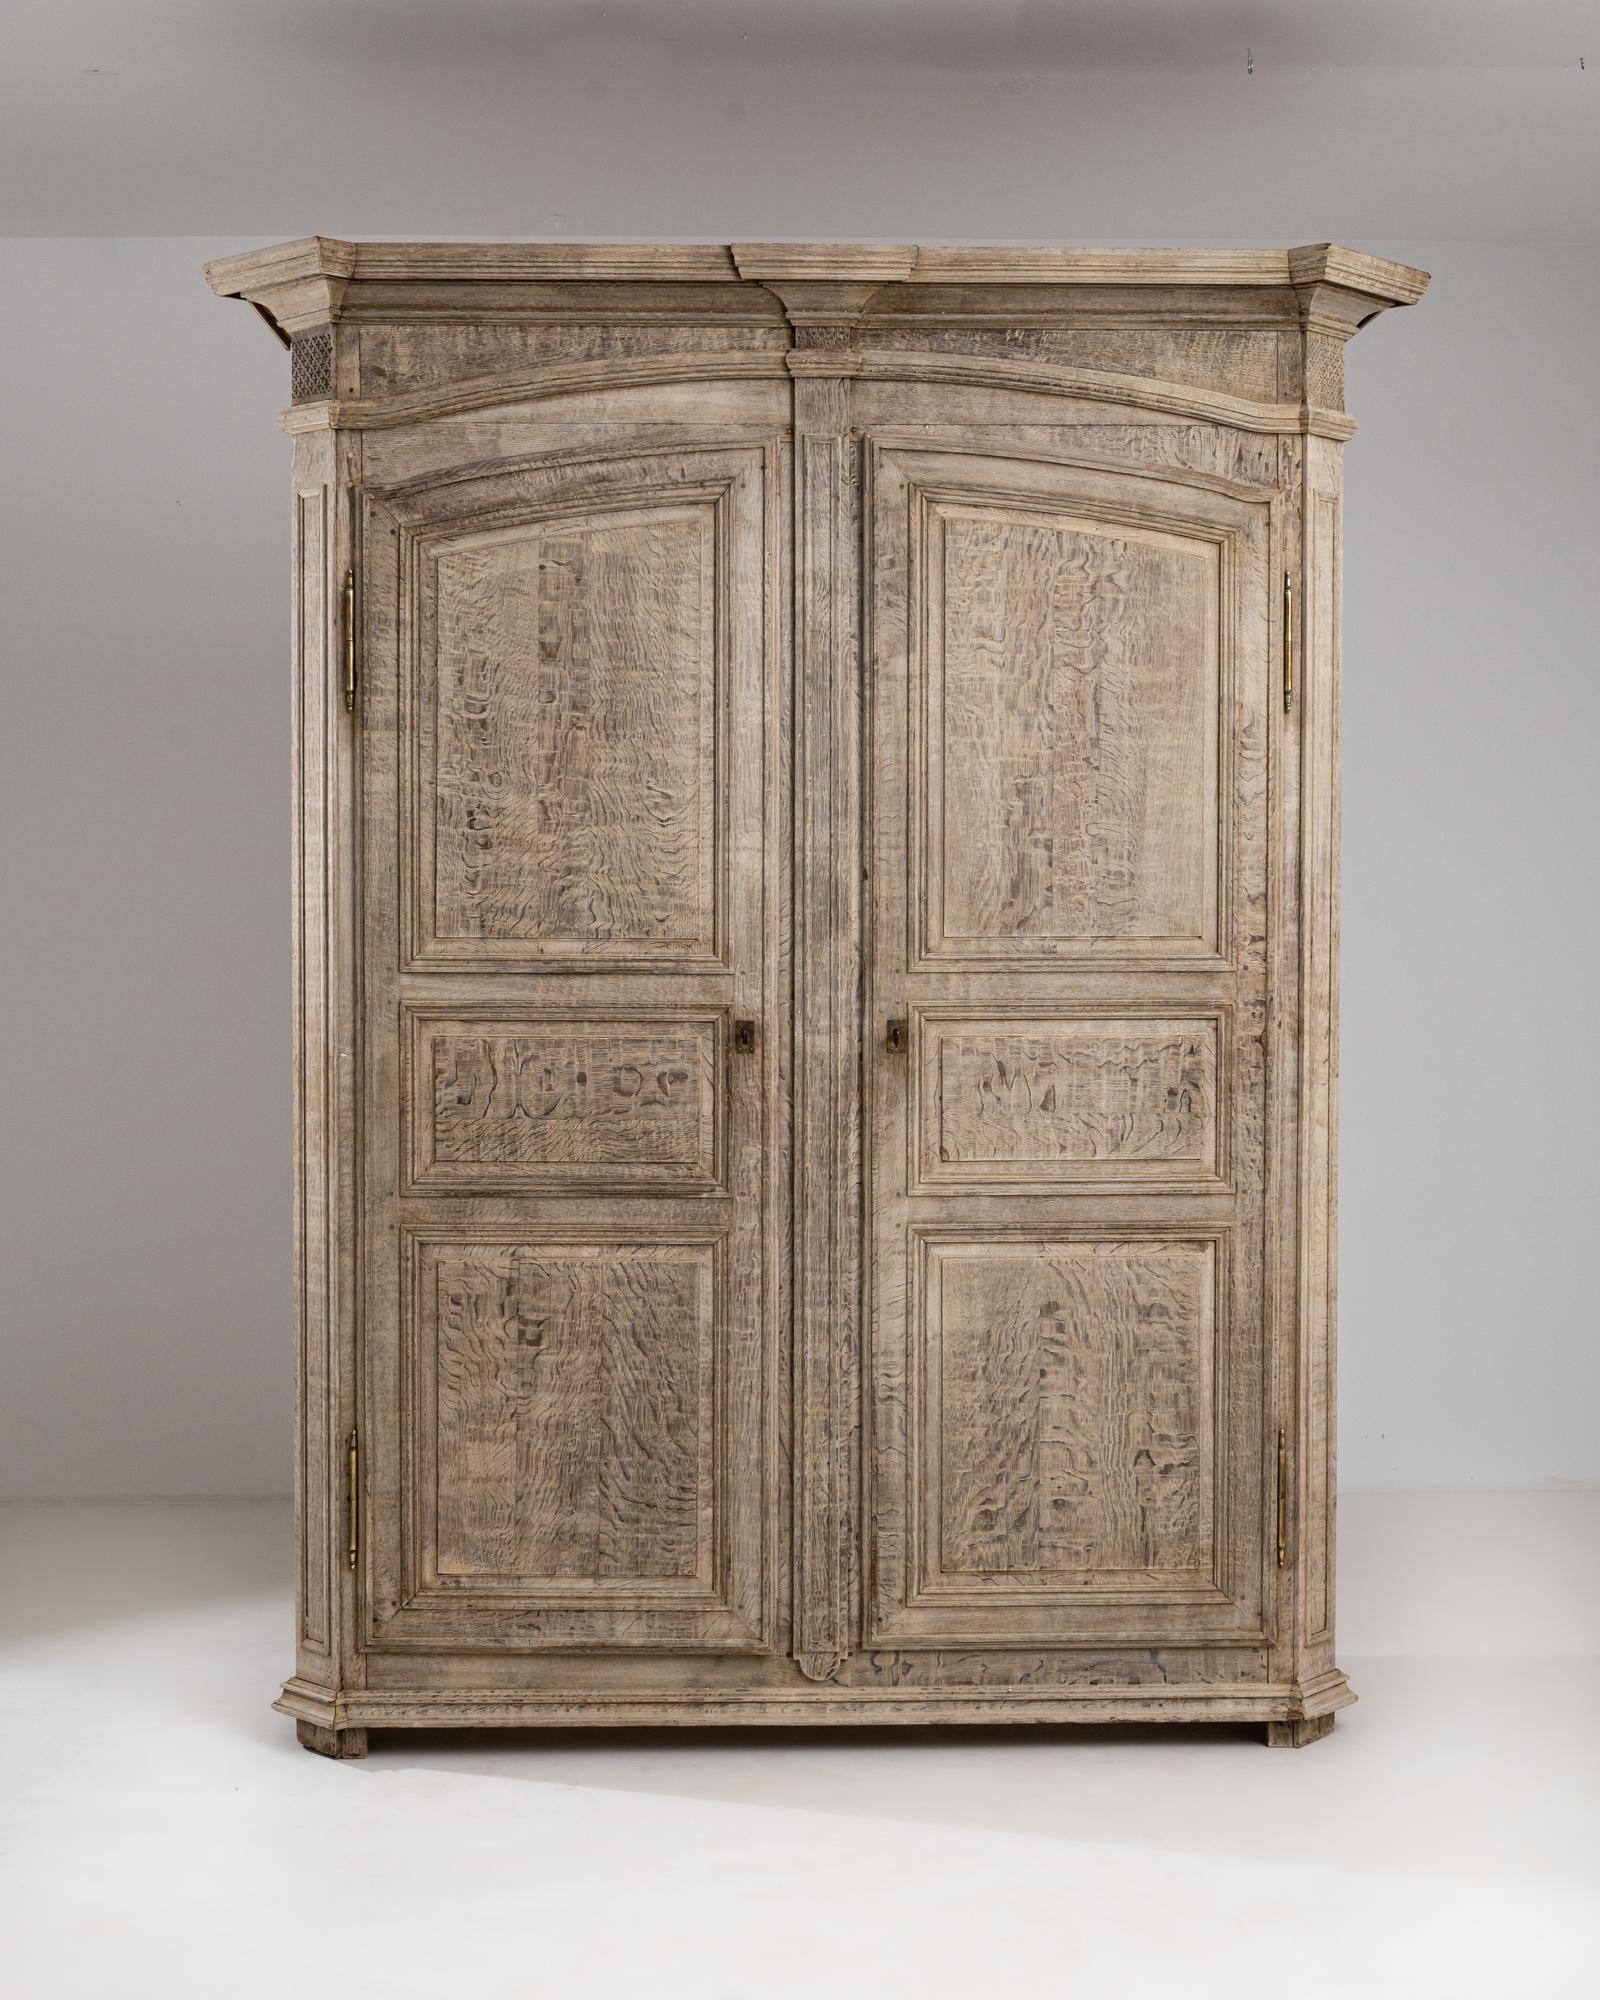 This provincial oak armoire combines a statuesque design with a subtle natural finish. Built in France in the 1800s, the burled grain of the oak provides elegant organic ornament, while the carved moldings —columns, an arched top-rail and a dramatic